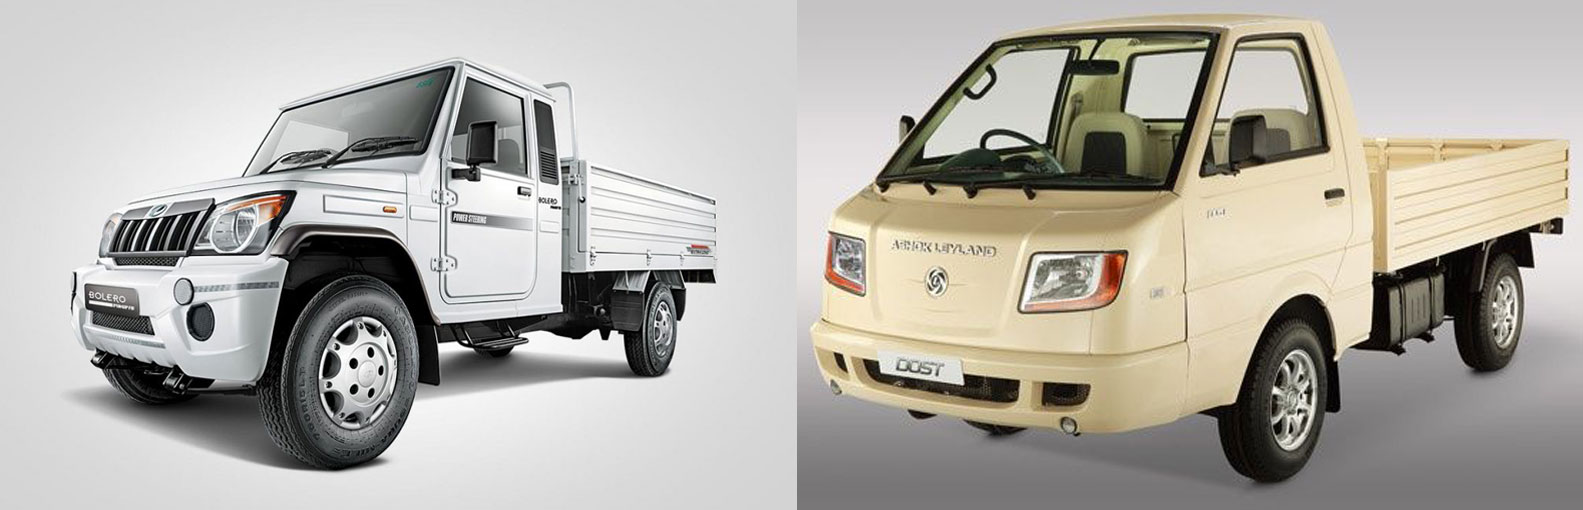 Get used and new MEDIUM, INTERMEDIATE AND LIGHT DUTY TRUCK finance assistance .